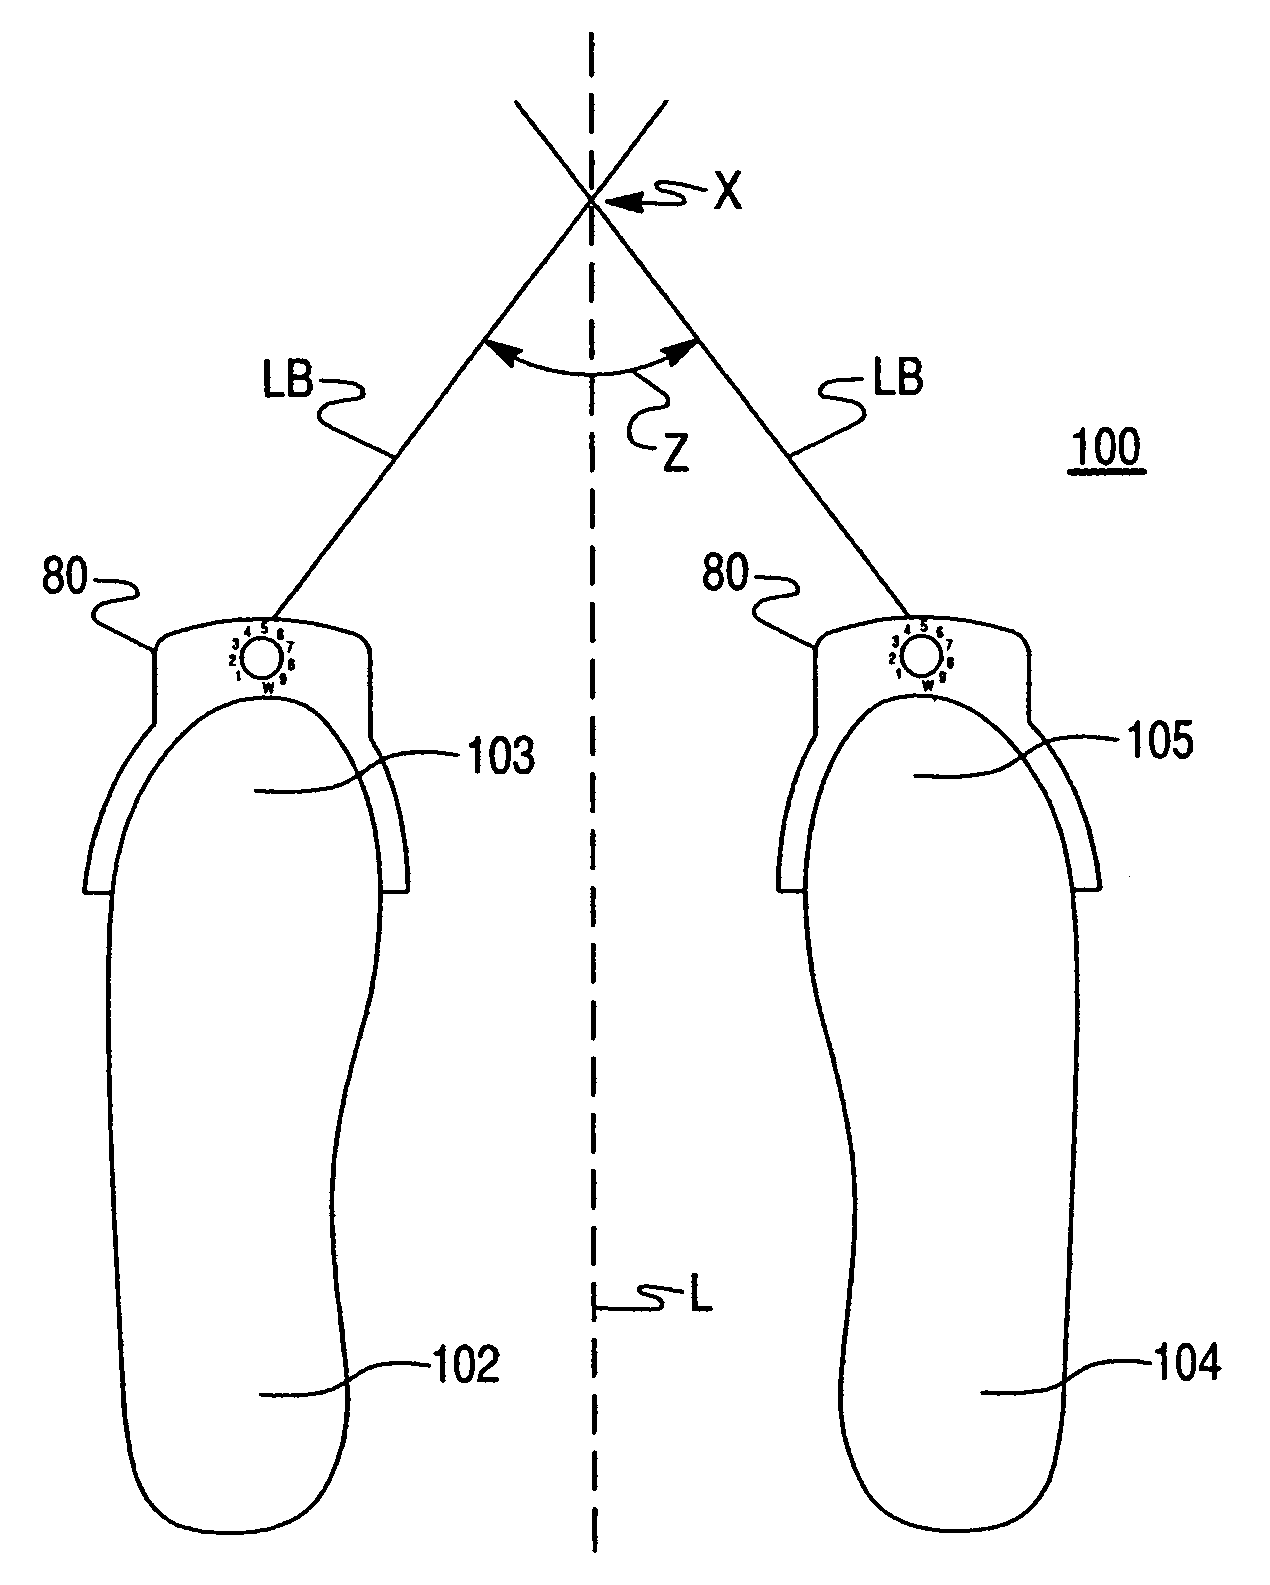 Golf alignment device, method and apparatus